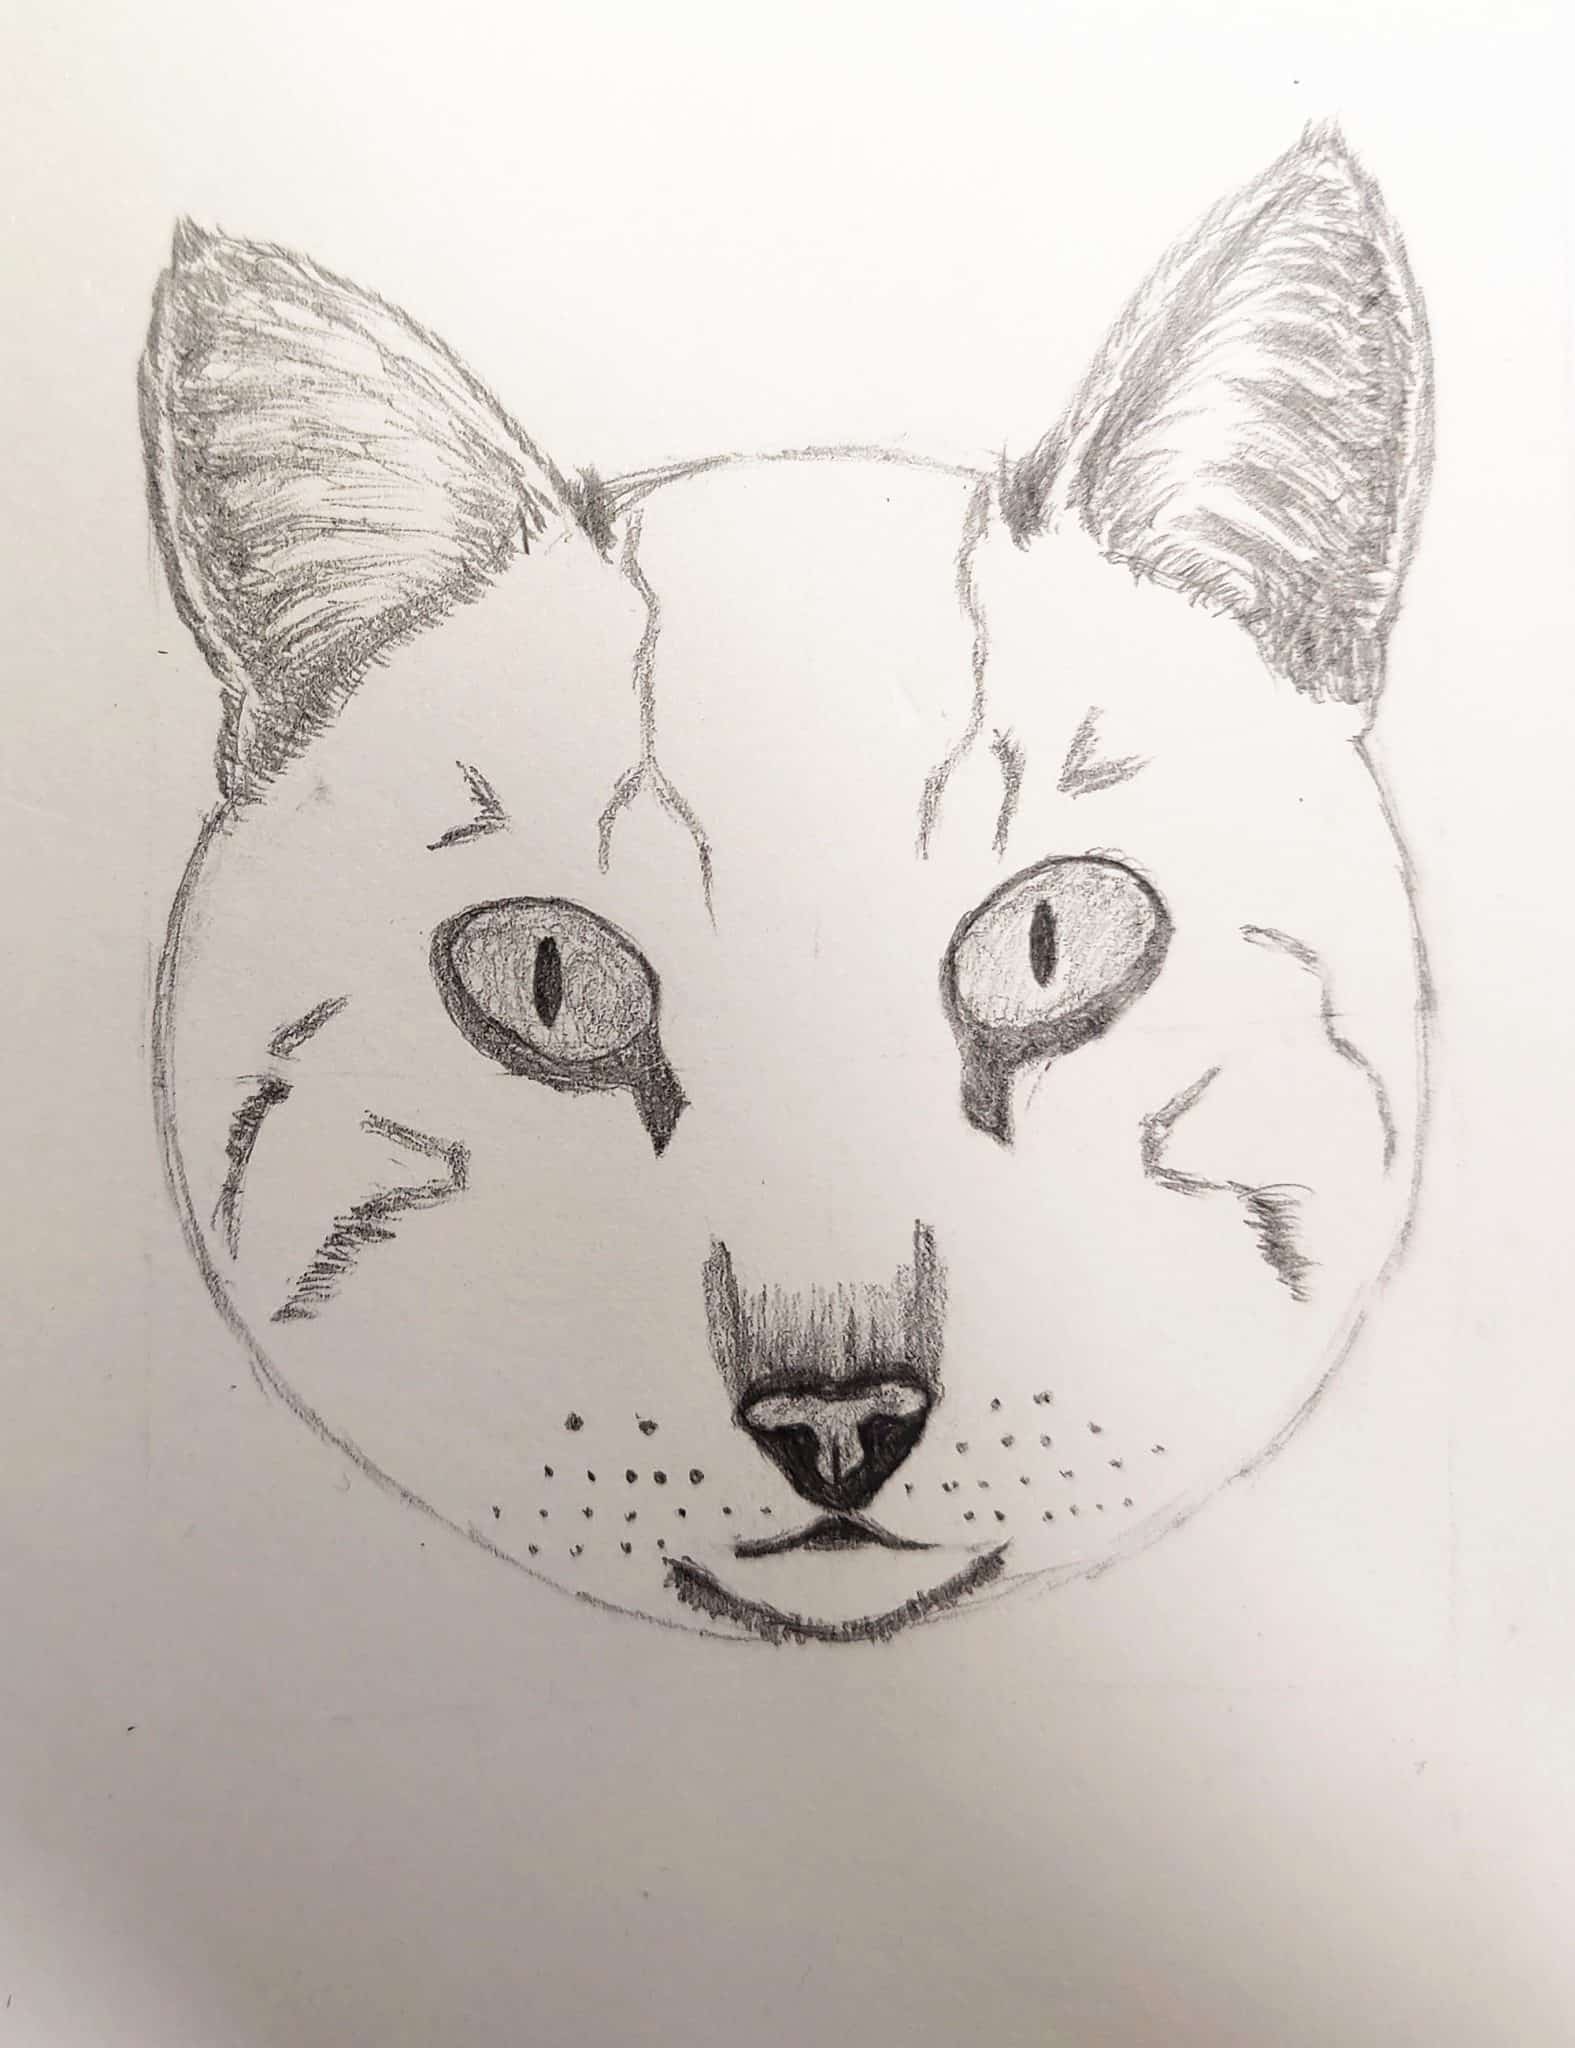 How to Draw a Cat Face Step by Step